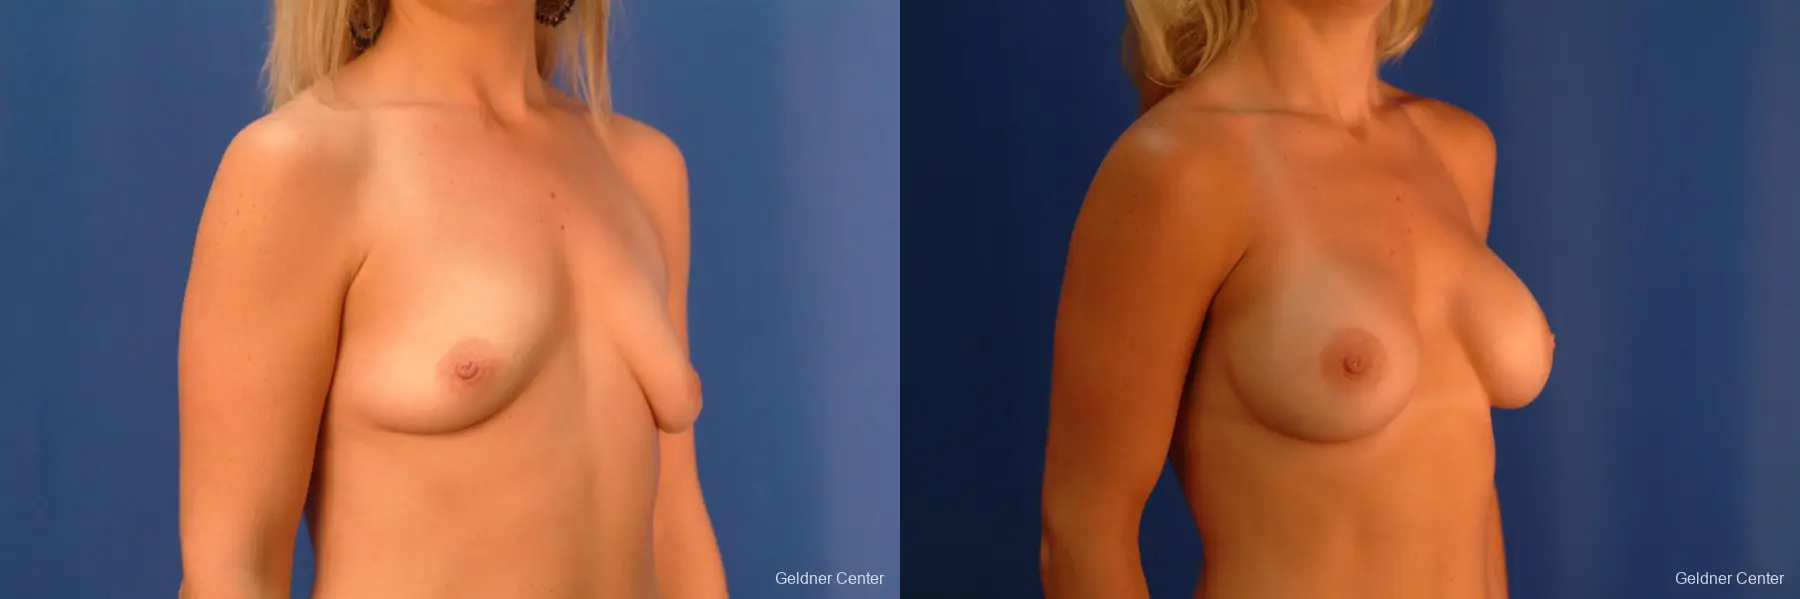 Breast Augmentation Lake Shore Dr, Chicago 2350 - Before and After 3